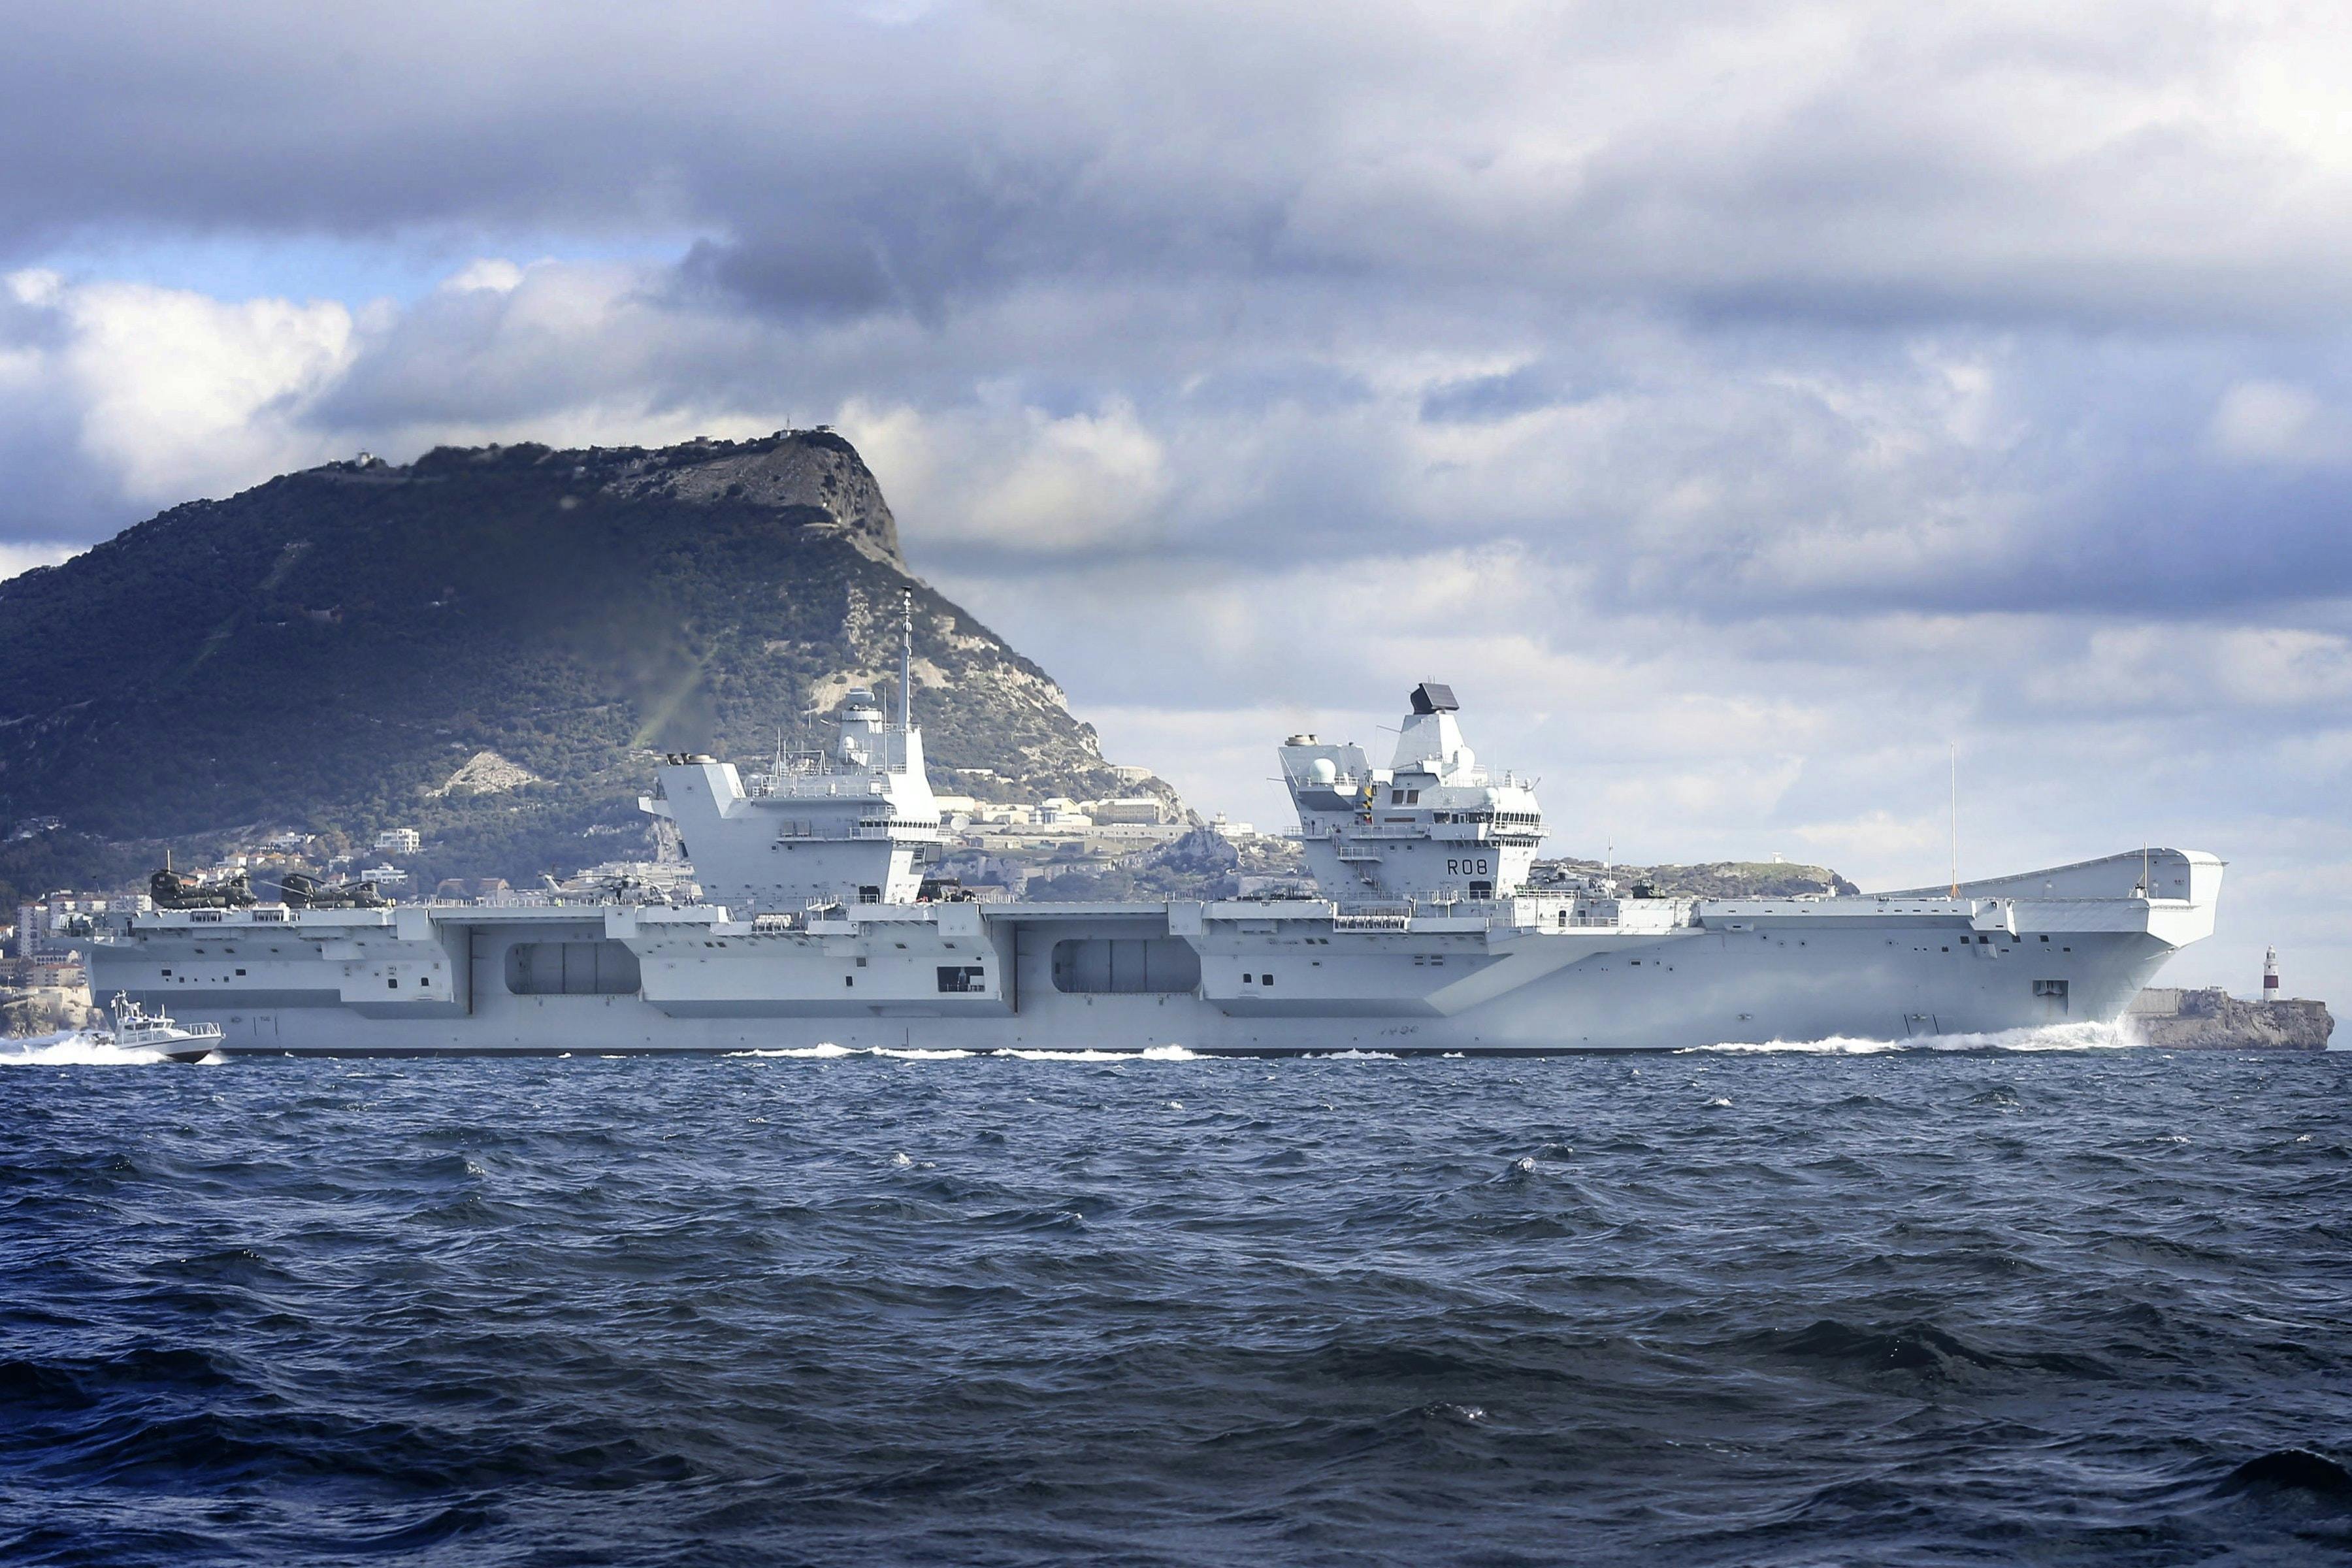 Gibraltar’s growing military role: Minister visits the Rock